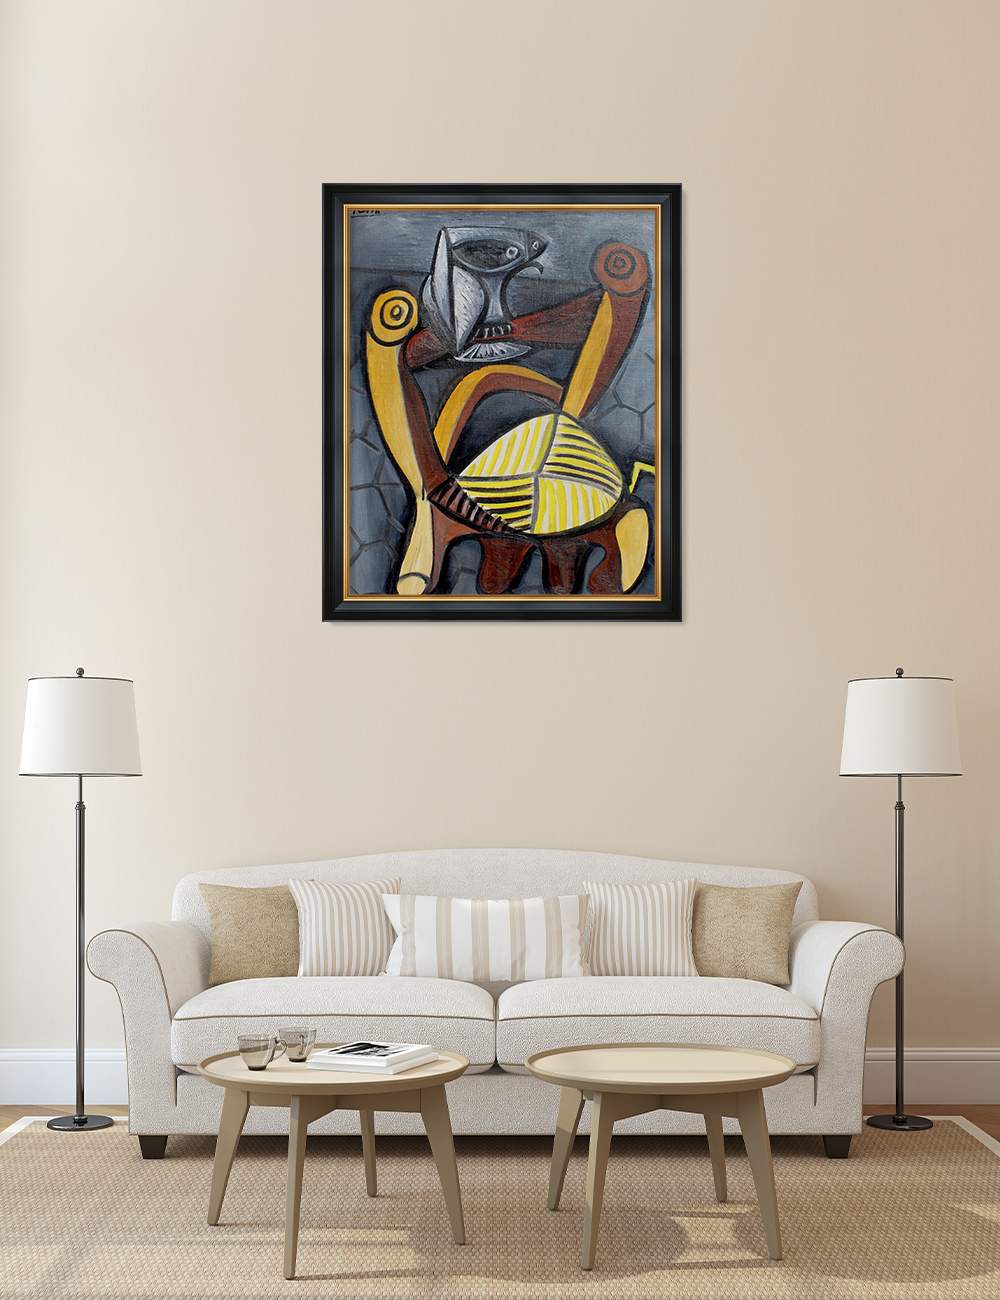 DECORARTS Owl on the Chair by Pablo Picasso, Giclee Print on Acid Free  Canvas with Matching Solid Wood Frame, Framed Artwork for Wall Decor. Total  Framed Size: W 27.25